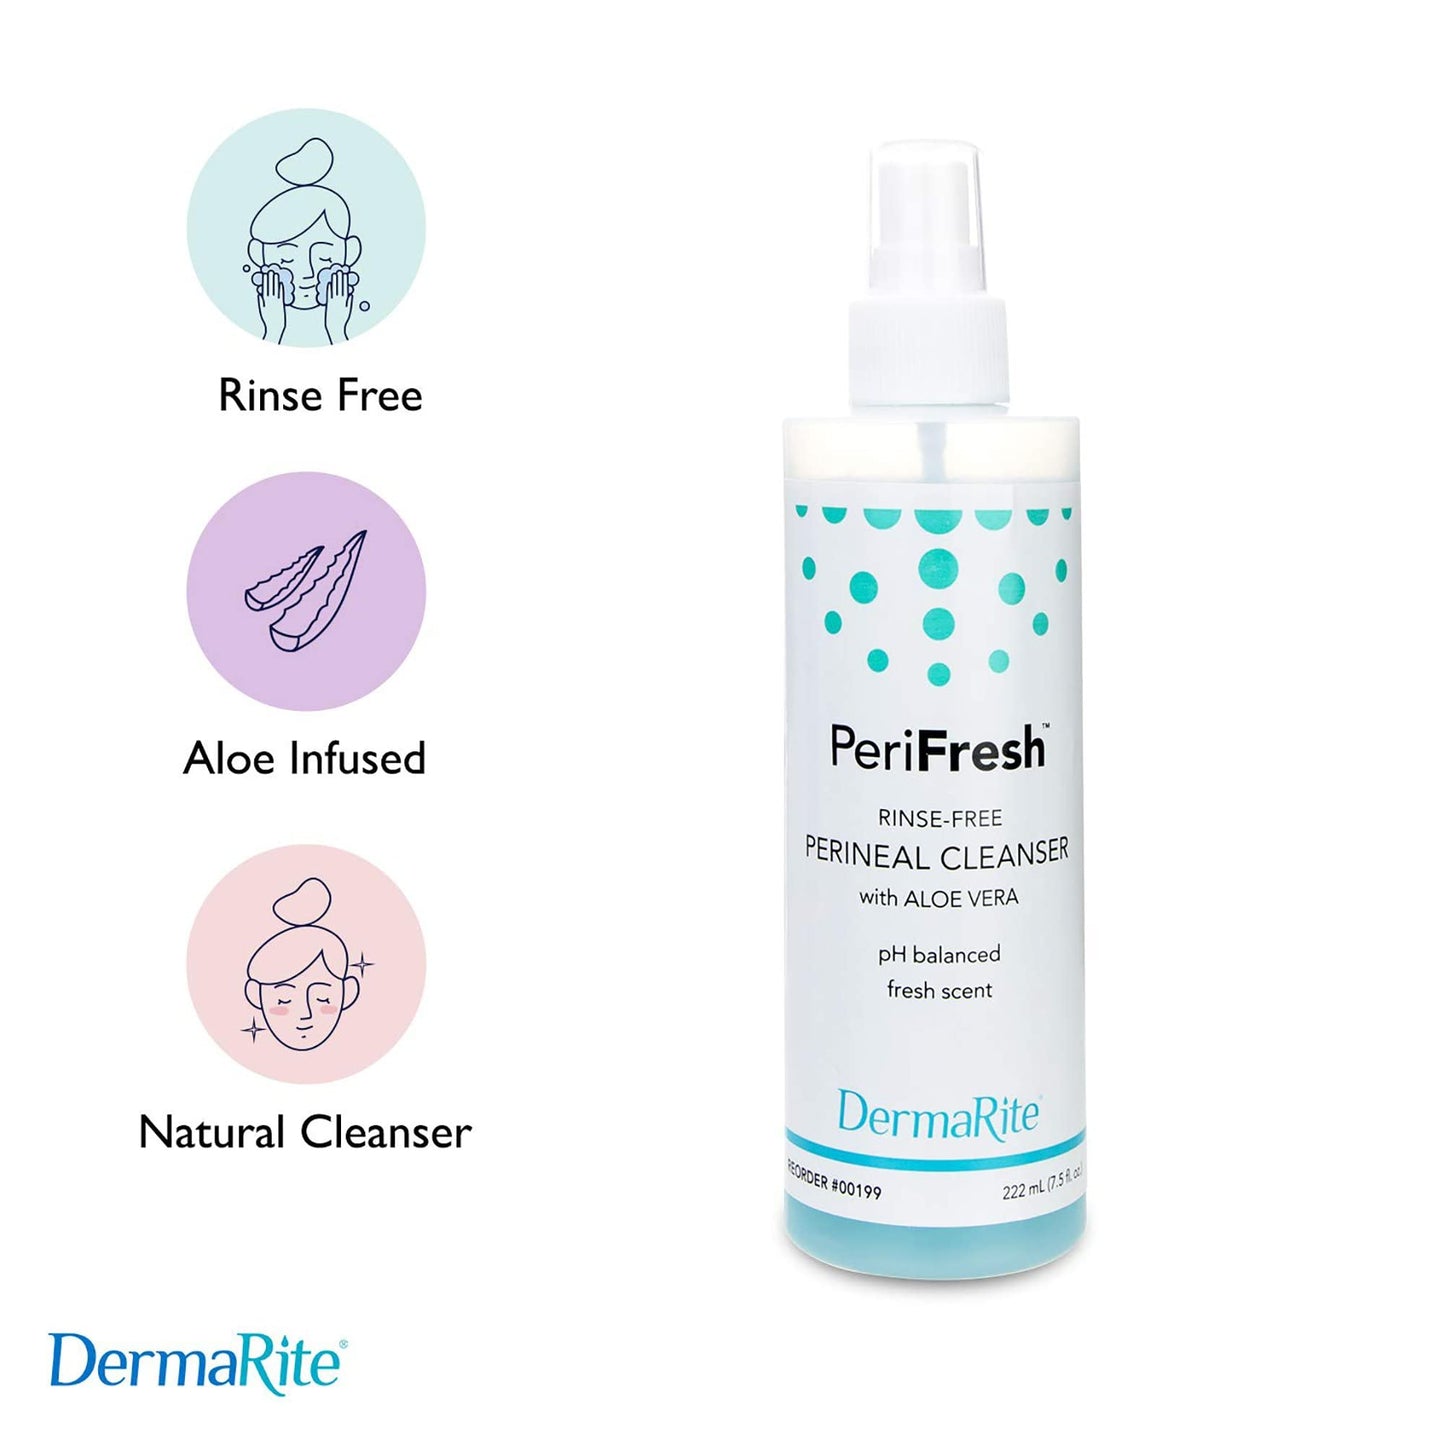 PeriFresh No Rinse Perineal Cleanser Spray - 7.5 oz Peri Bottle - Mild Formula with Aloe - for Incontinence Care, Postpartum - for Men and Women